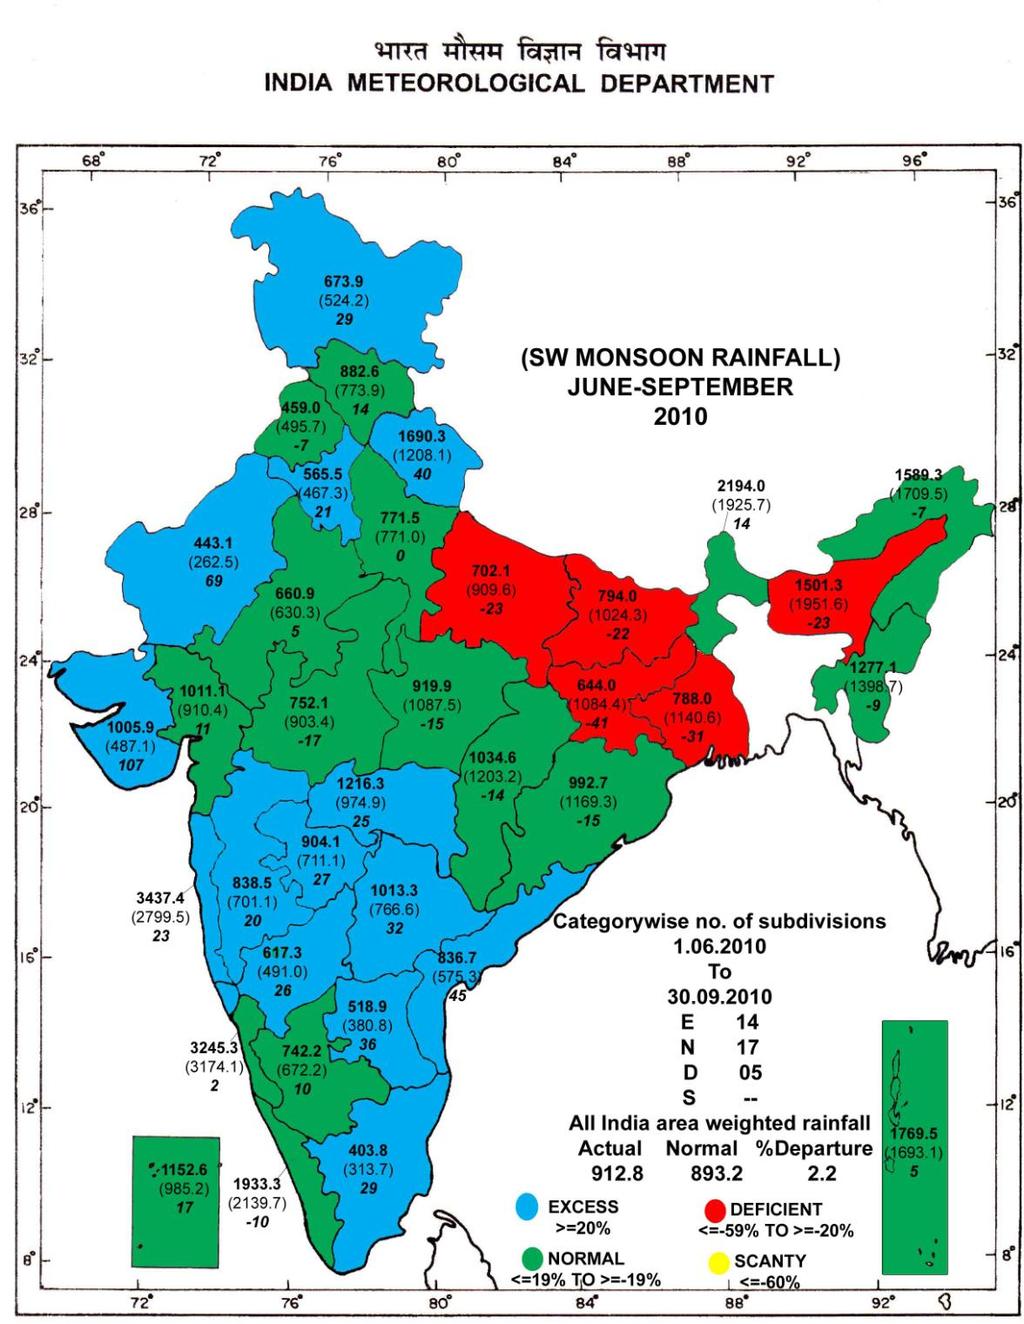 Fig.3: Sub-divisionwise rainfall distribution over India